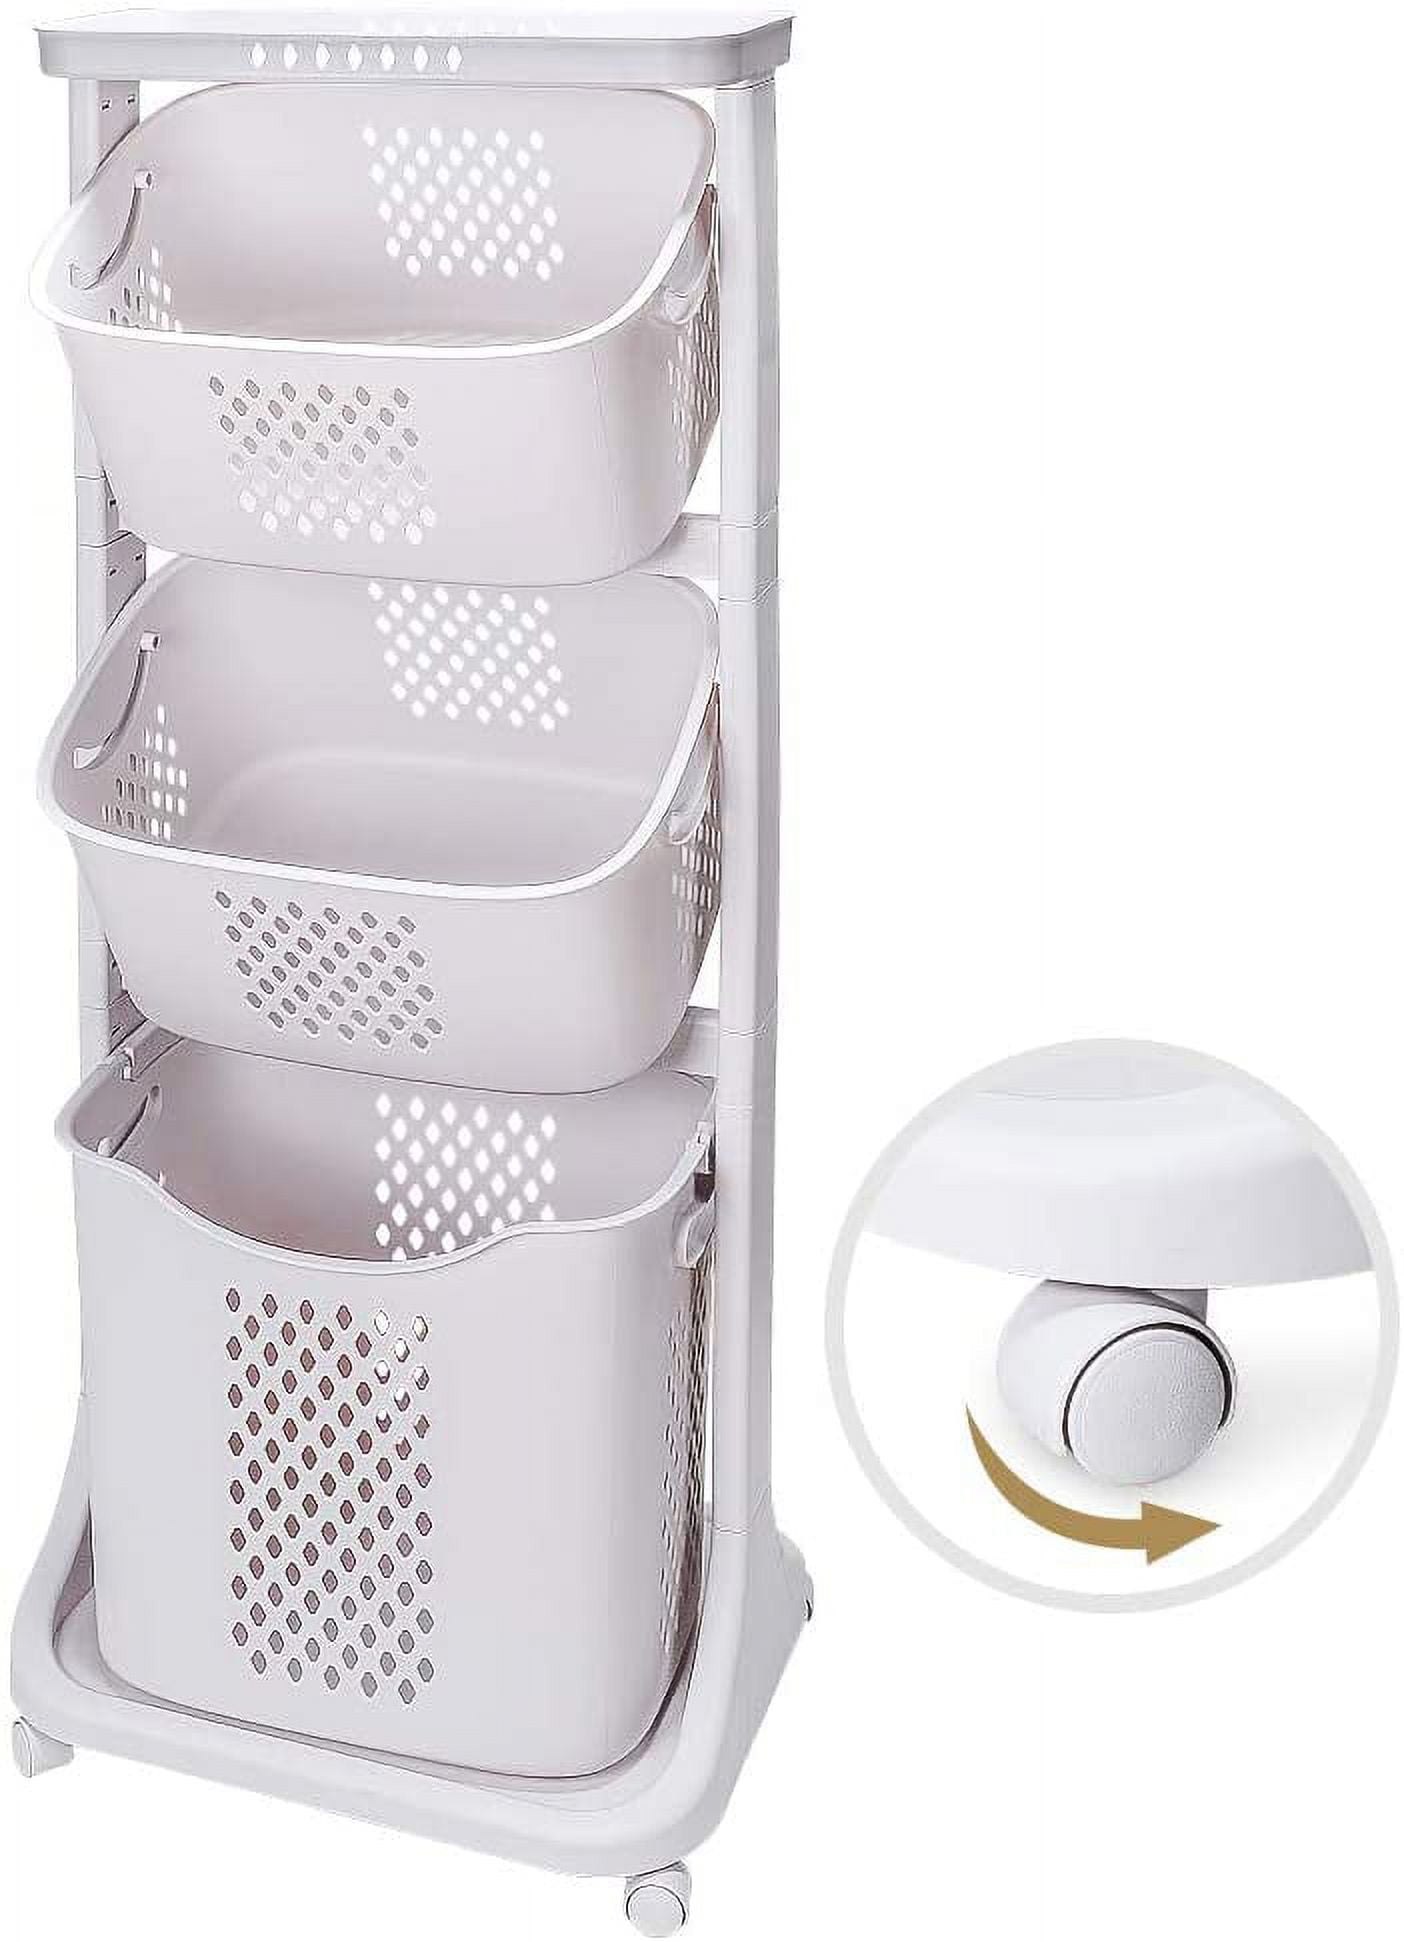 Laundry Basket 3 Tier Rolling Laundry Cart with Wheel Washing Hamper  Storage Bin Removable Storage Basket with HandleToys Clothing Organization  for